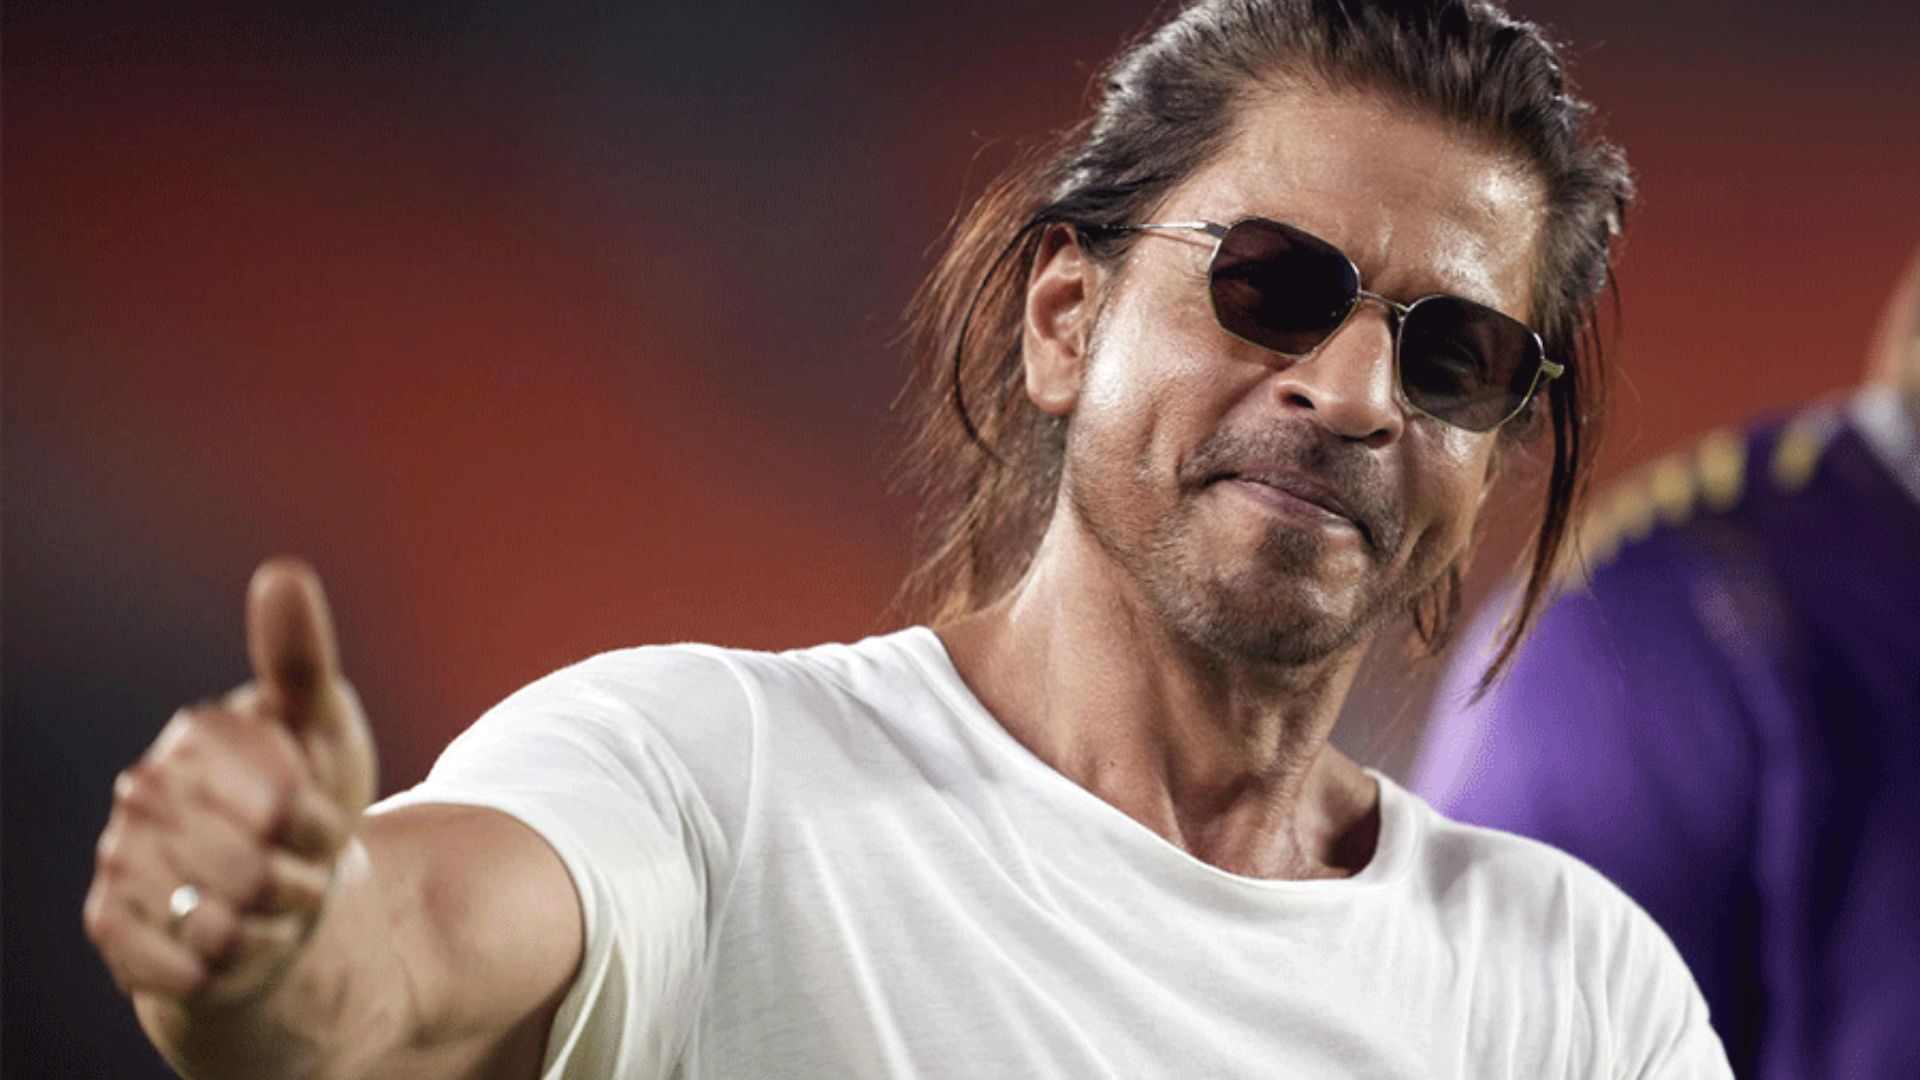 Shah Rukh Khan: The King of Bollywood Returns as the World's Third Richest Actor